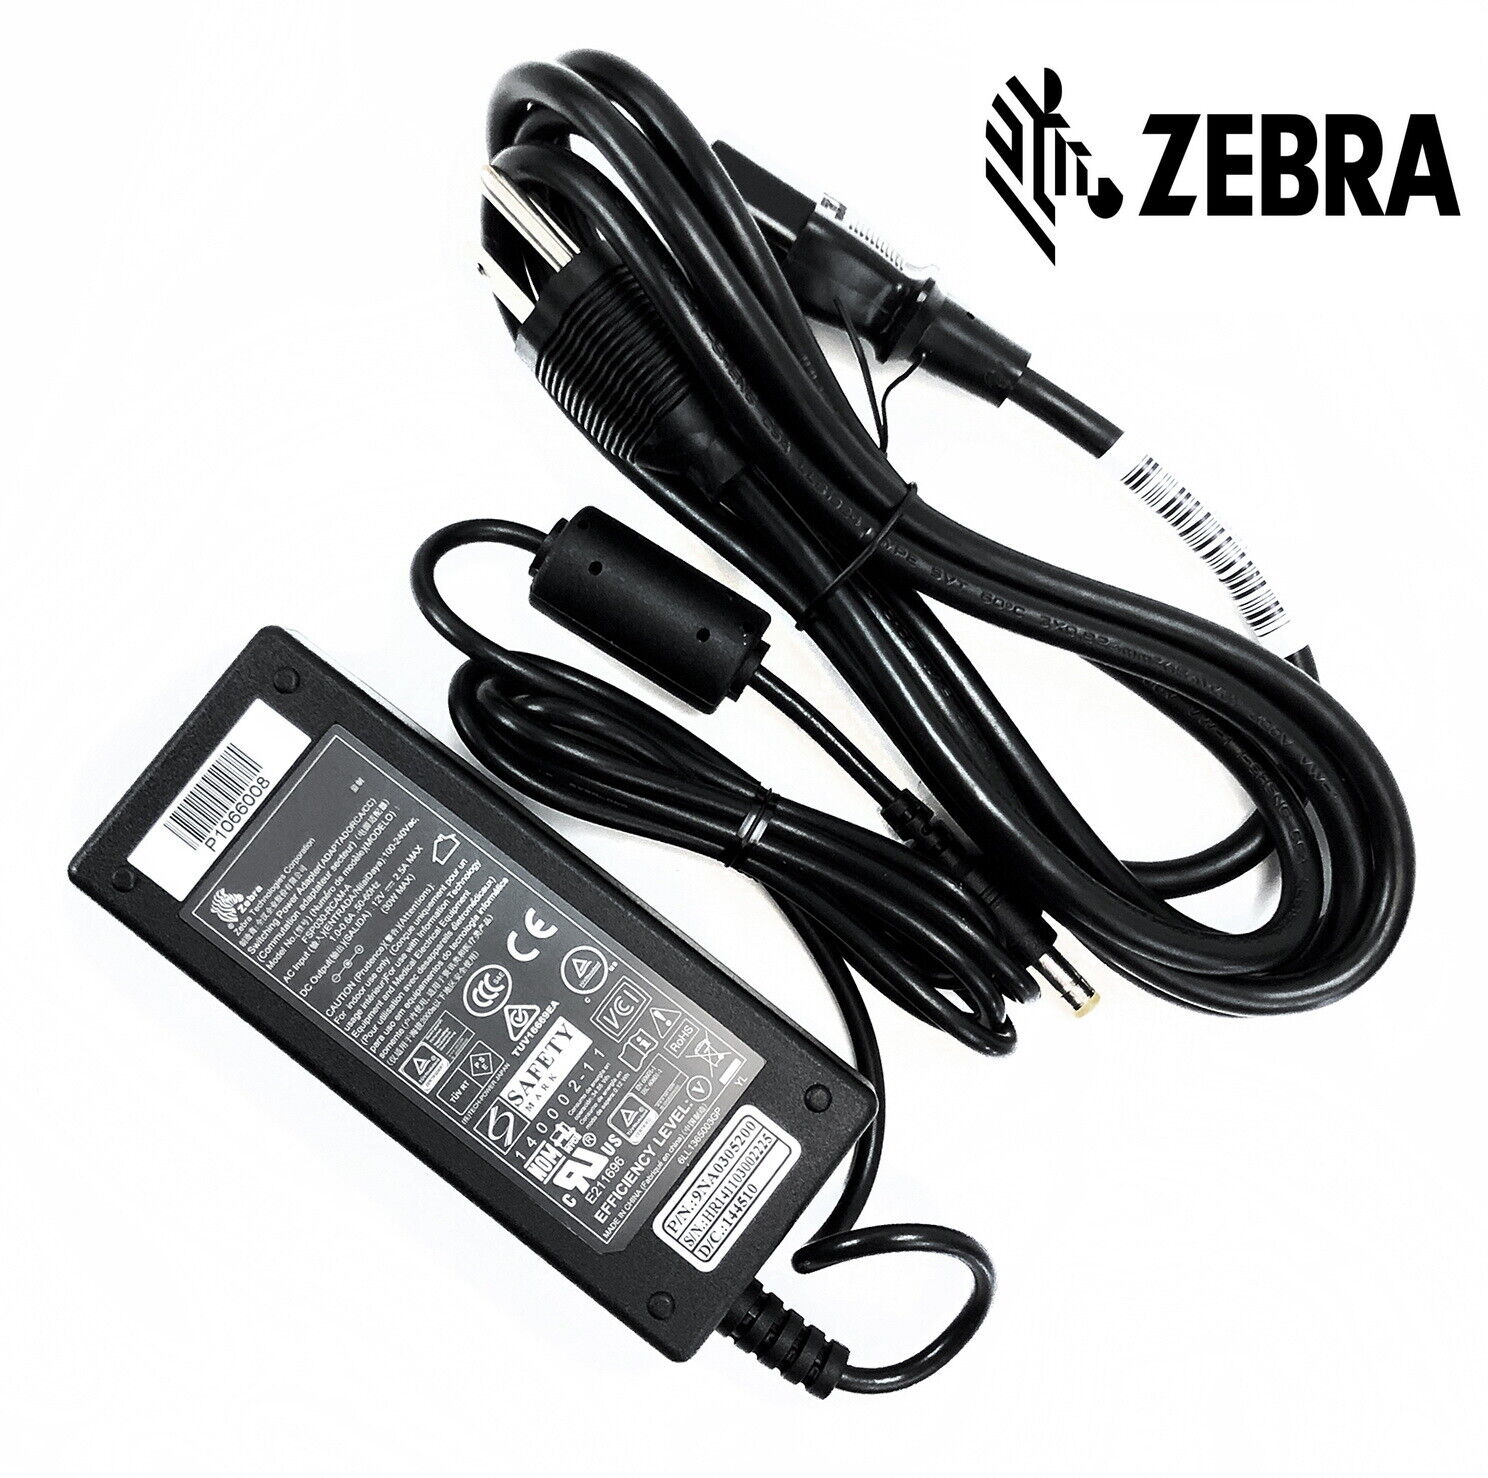 NEW OEM Zebra Healthcare AC Adapter Charger for ZQ510 ZQ520 Printers W/P.Cord Country/Region of Manufacture: